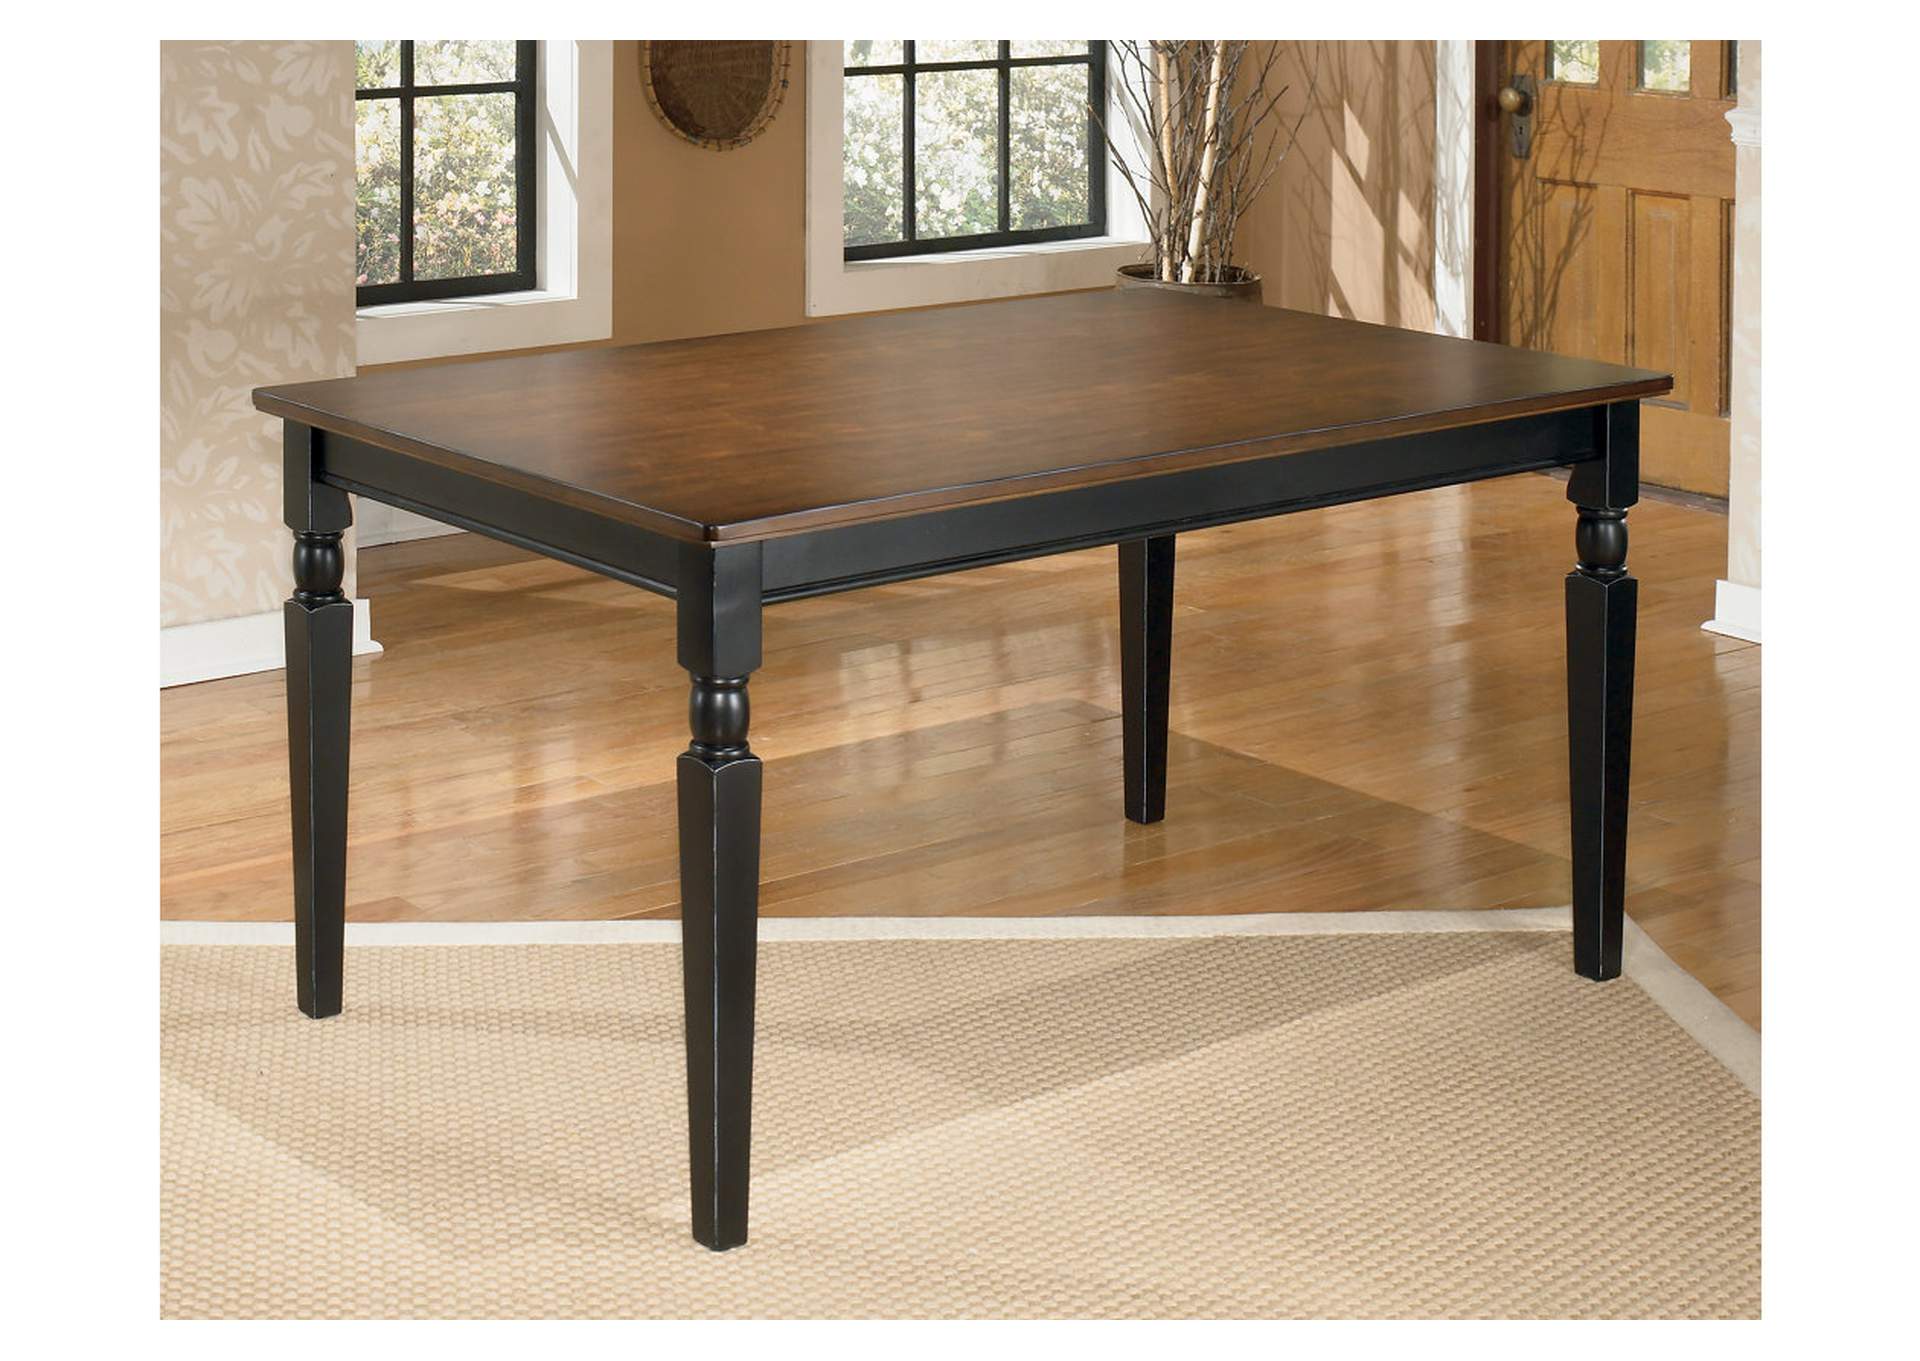 Owingsville Dining Table and 6 Chairs,Signature Design By Ashley